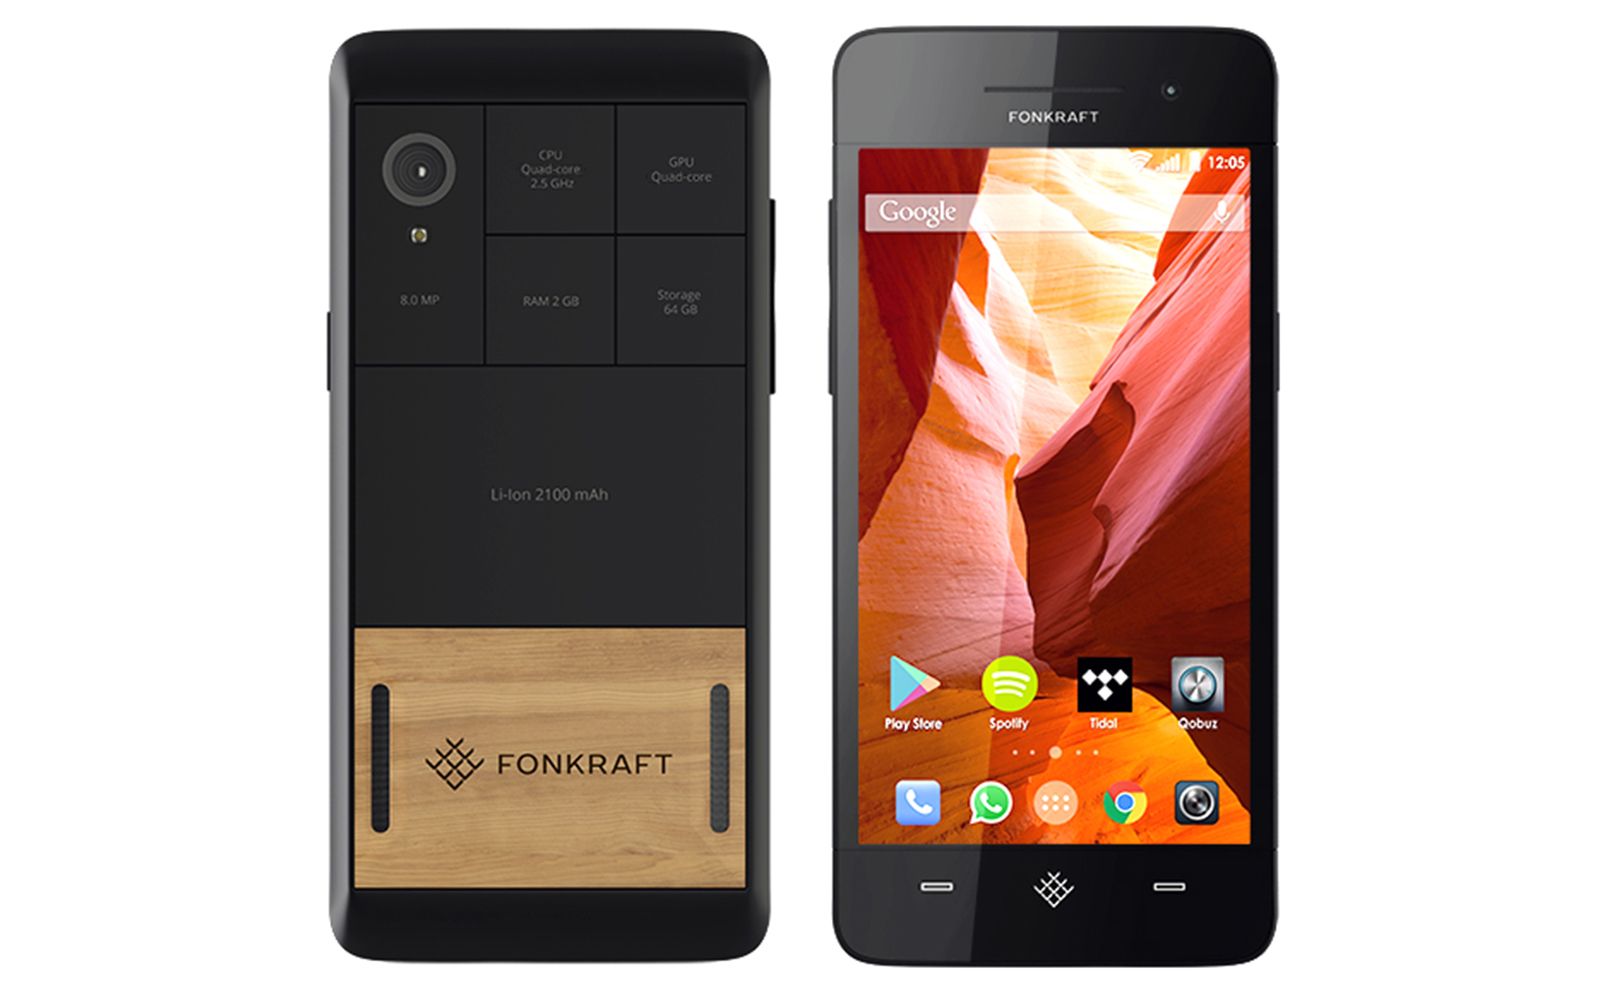 fonkraft modular smartphone with 4 100mah battery 20mp camera 192khz audio and more is here image 4